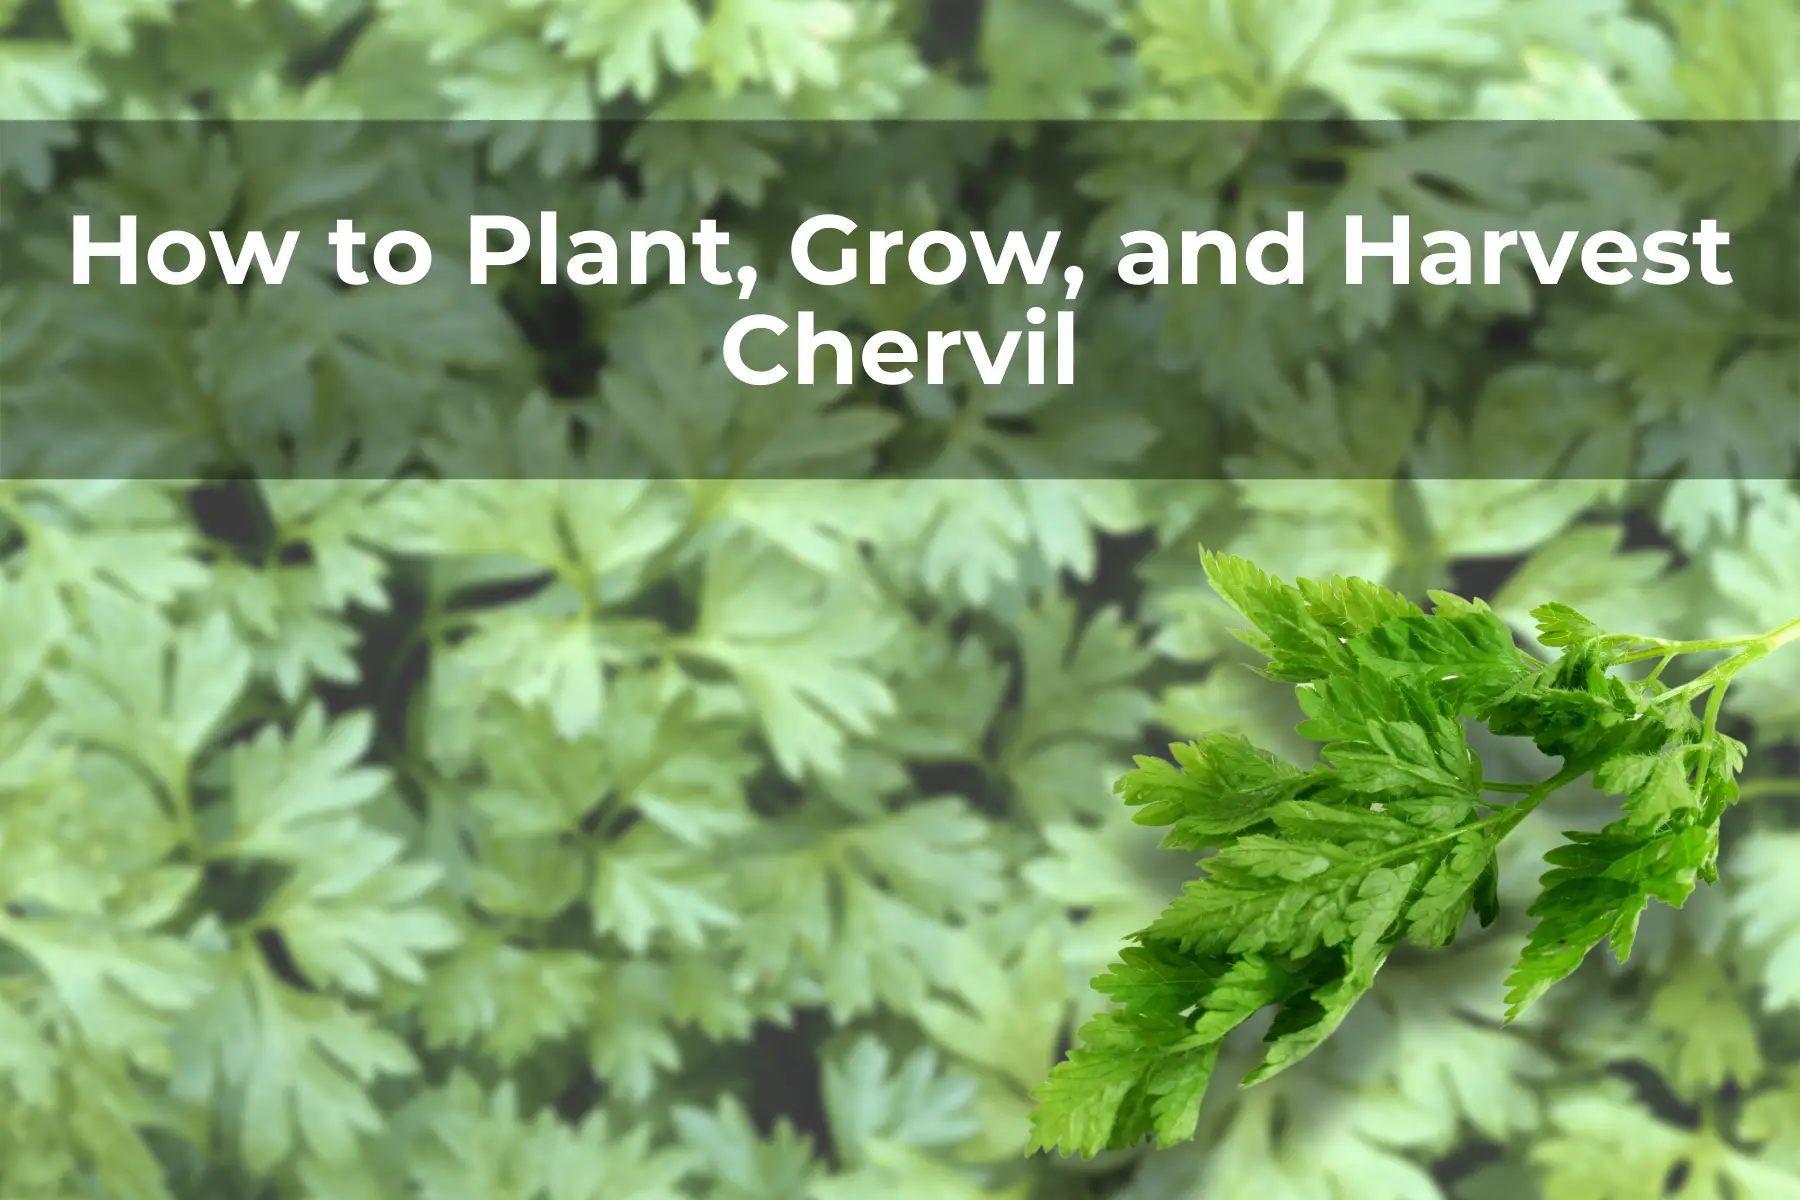 How to Plant, Grow, and Harvest Chervil